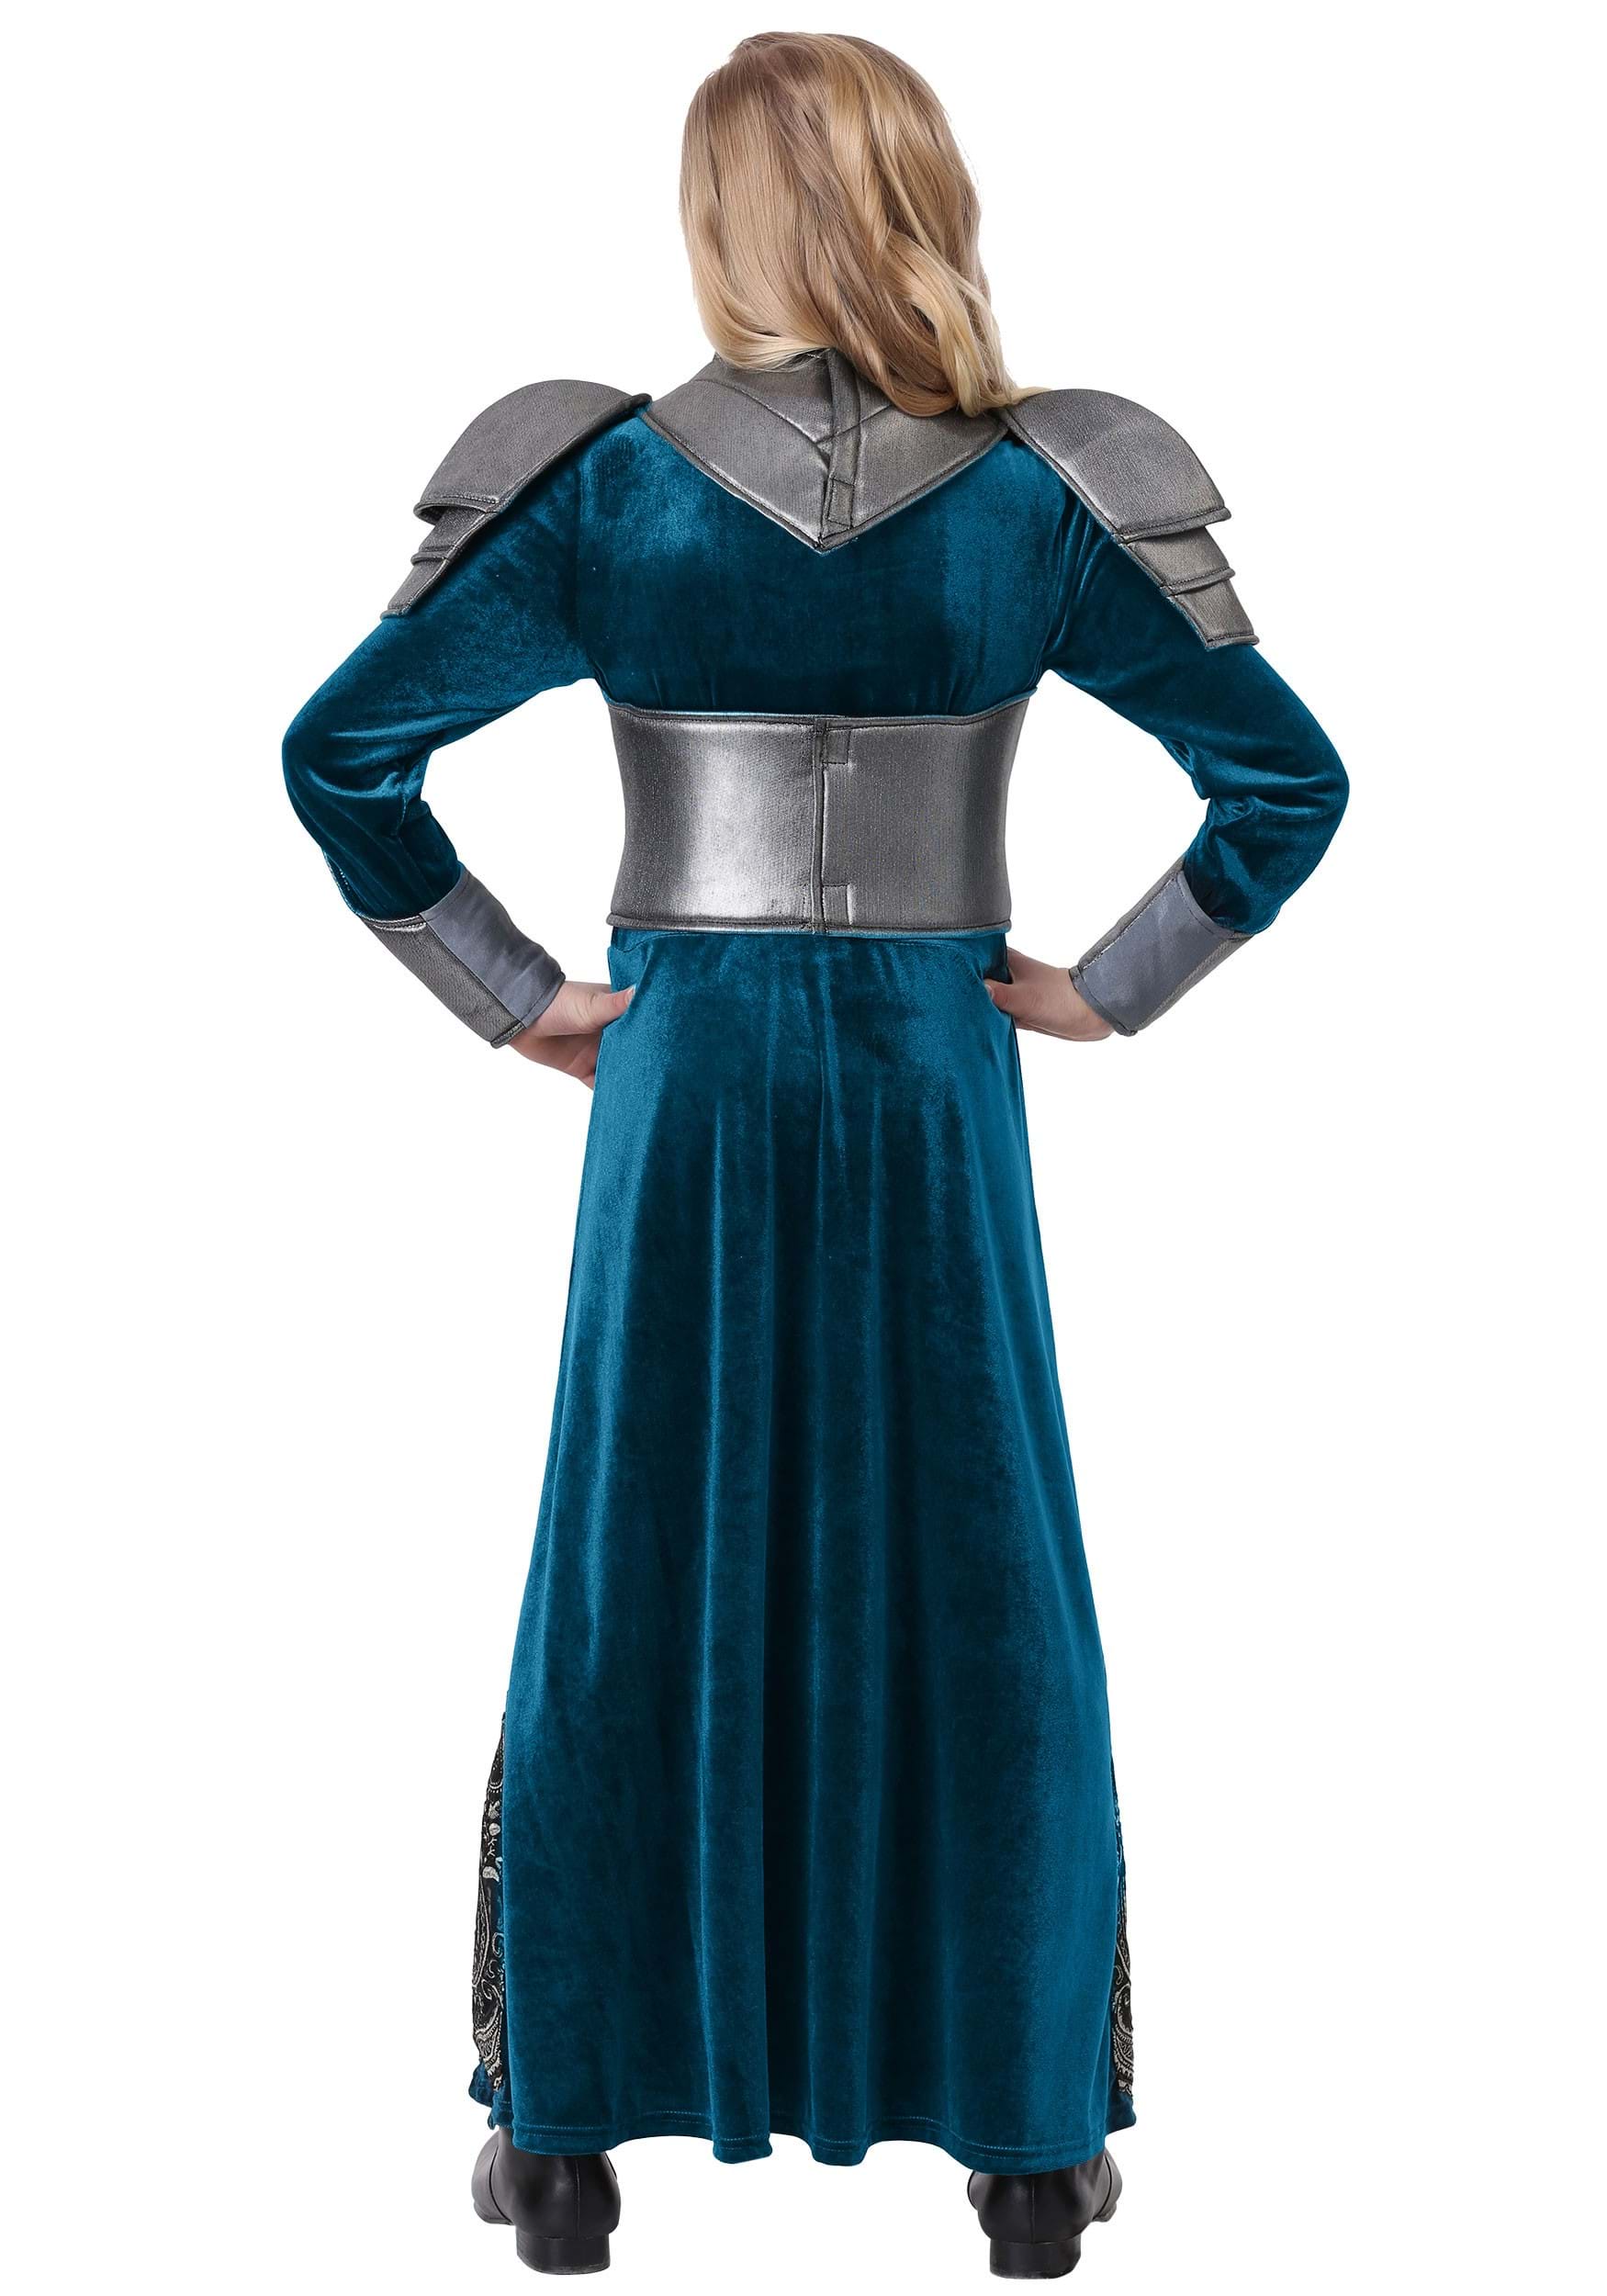 Medieval Knight Costume For Girl's